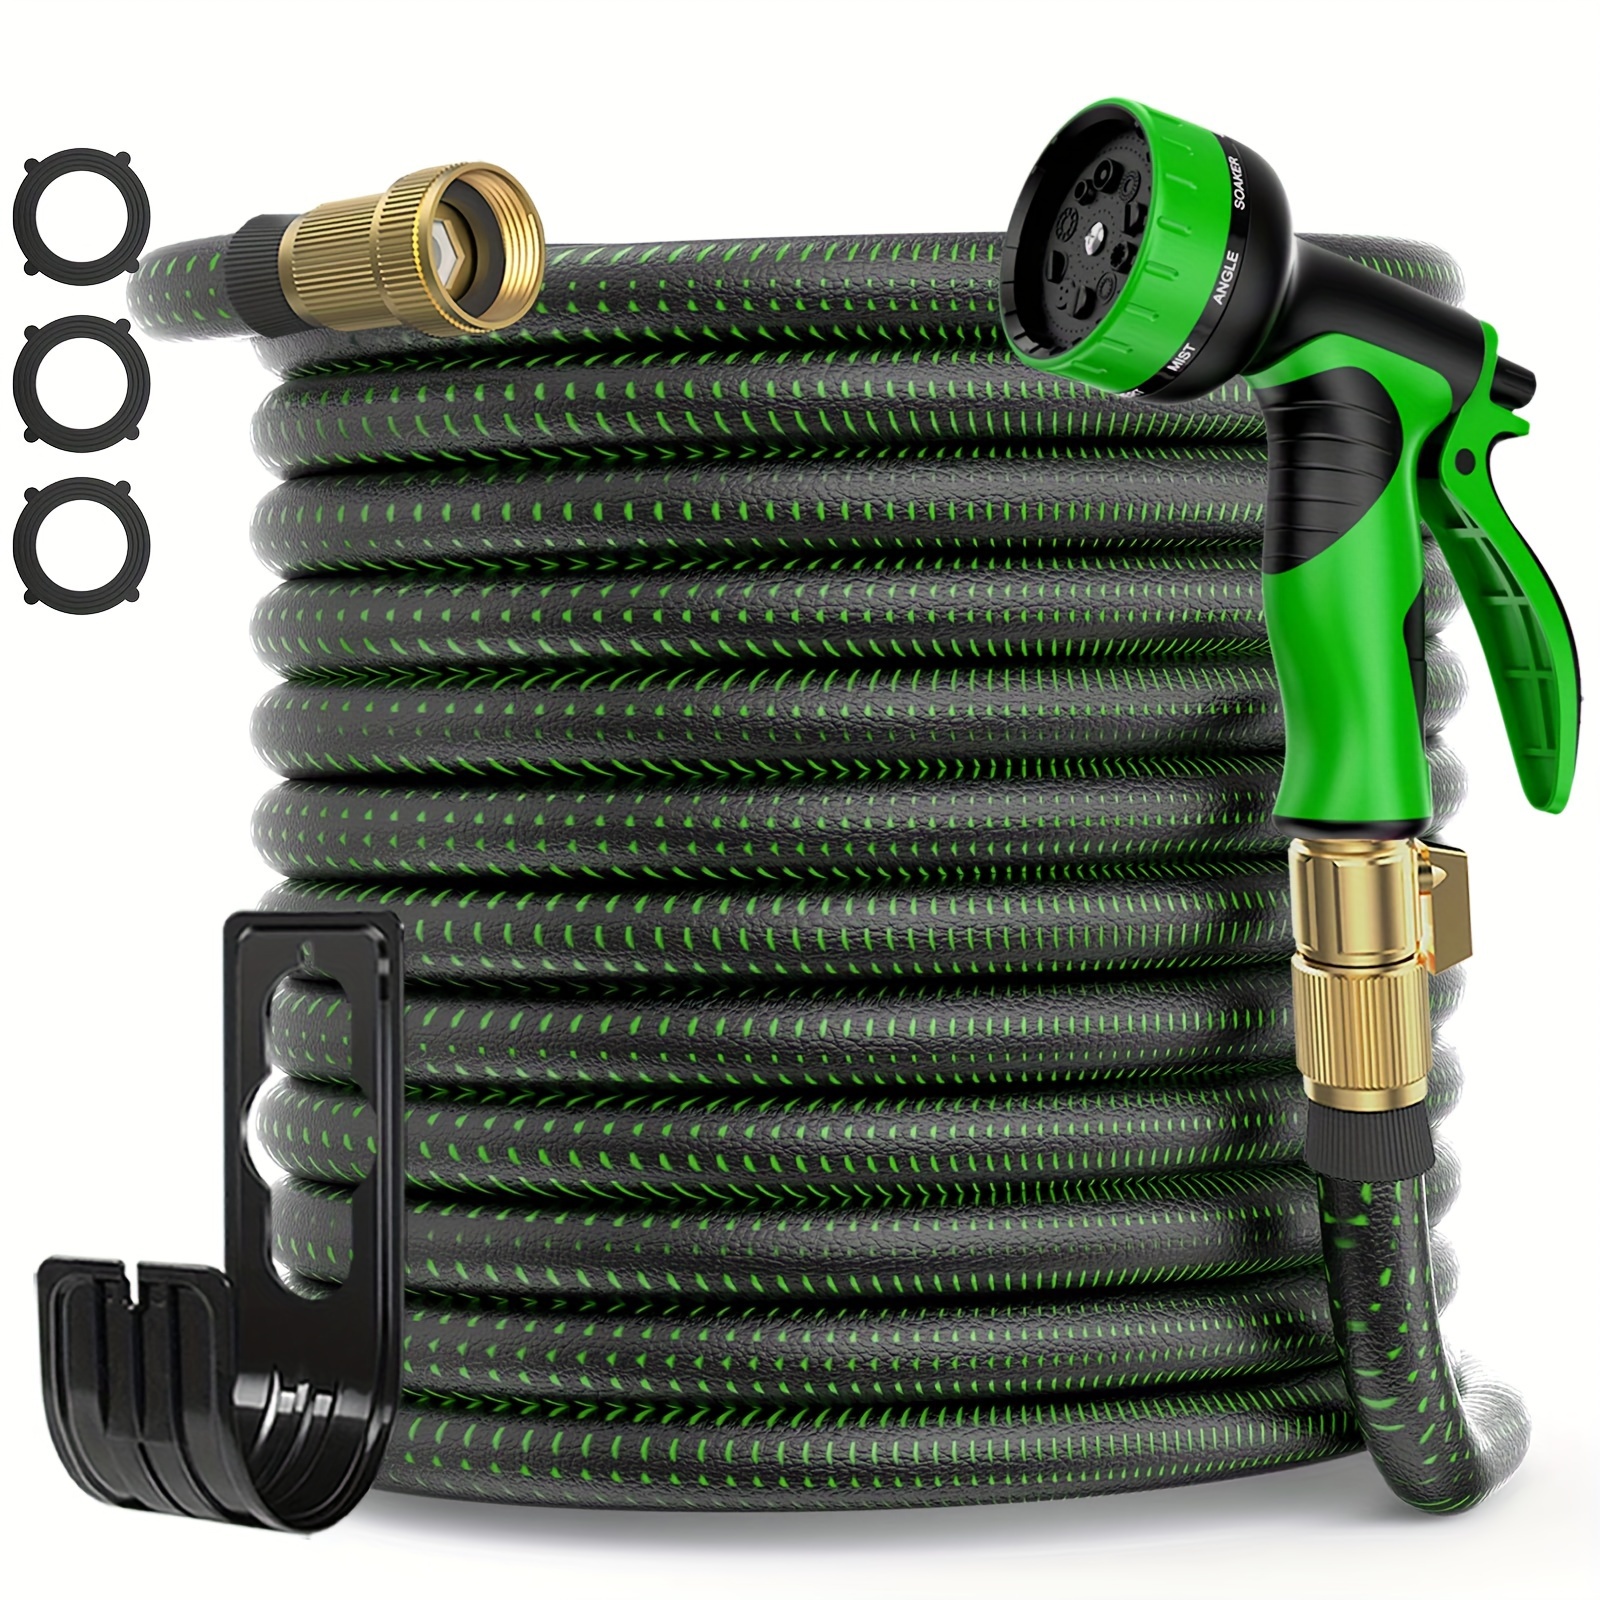 

Upgrade 100ft Expandable Garden Hose Water Hose With 10-function High-pressure Spray Nozzle, Heavy Duty Flexible Hose, 3/4" Solid Brass Fittings Leakproof Design Water Tube Hose